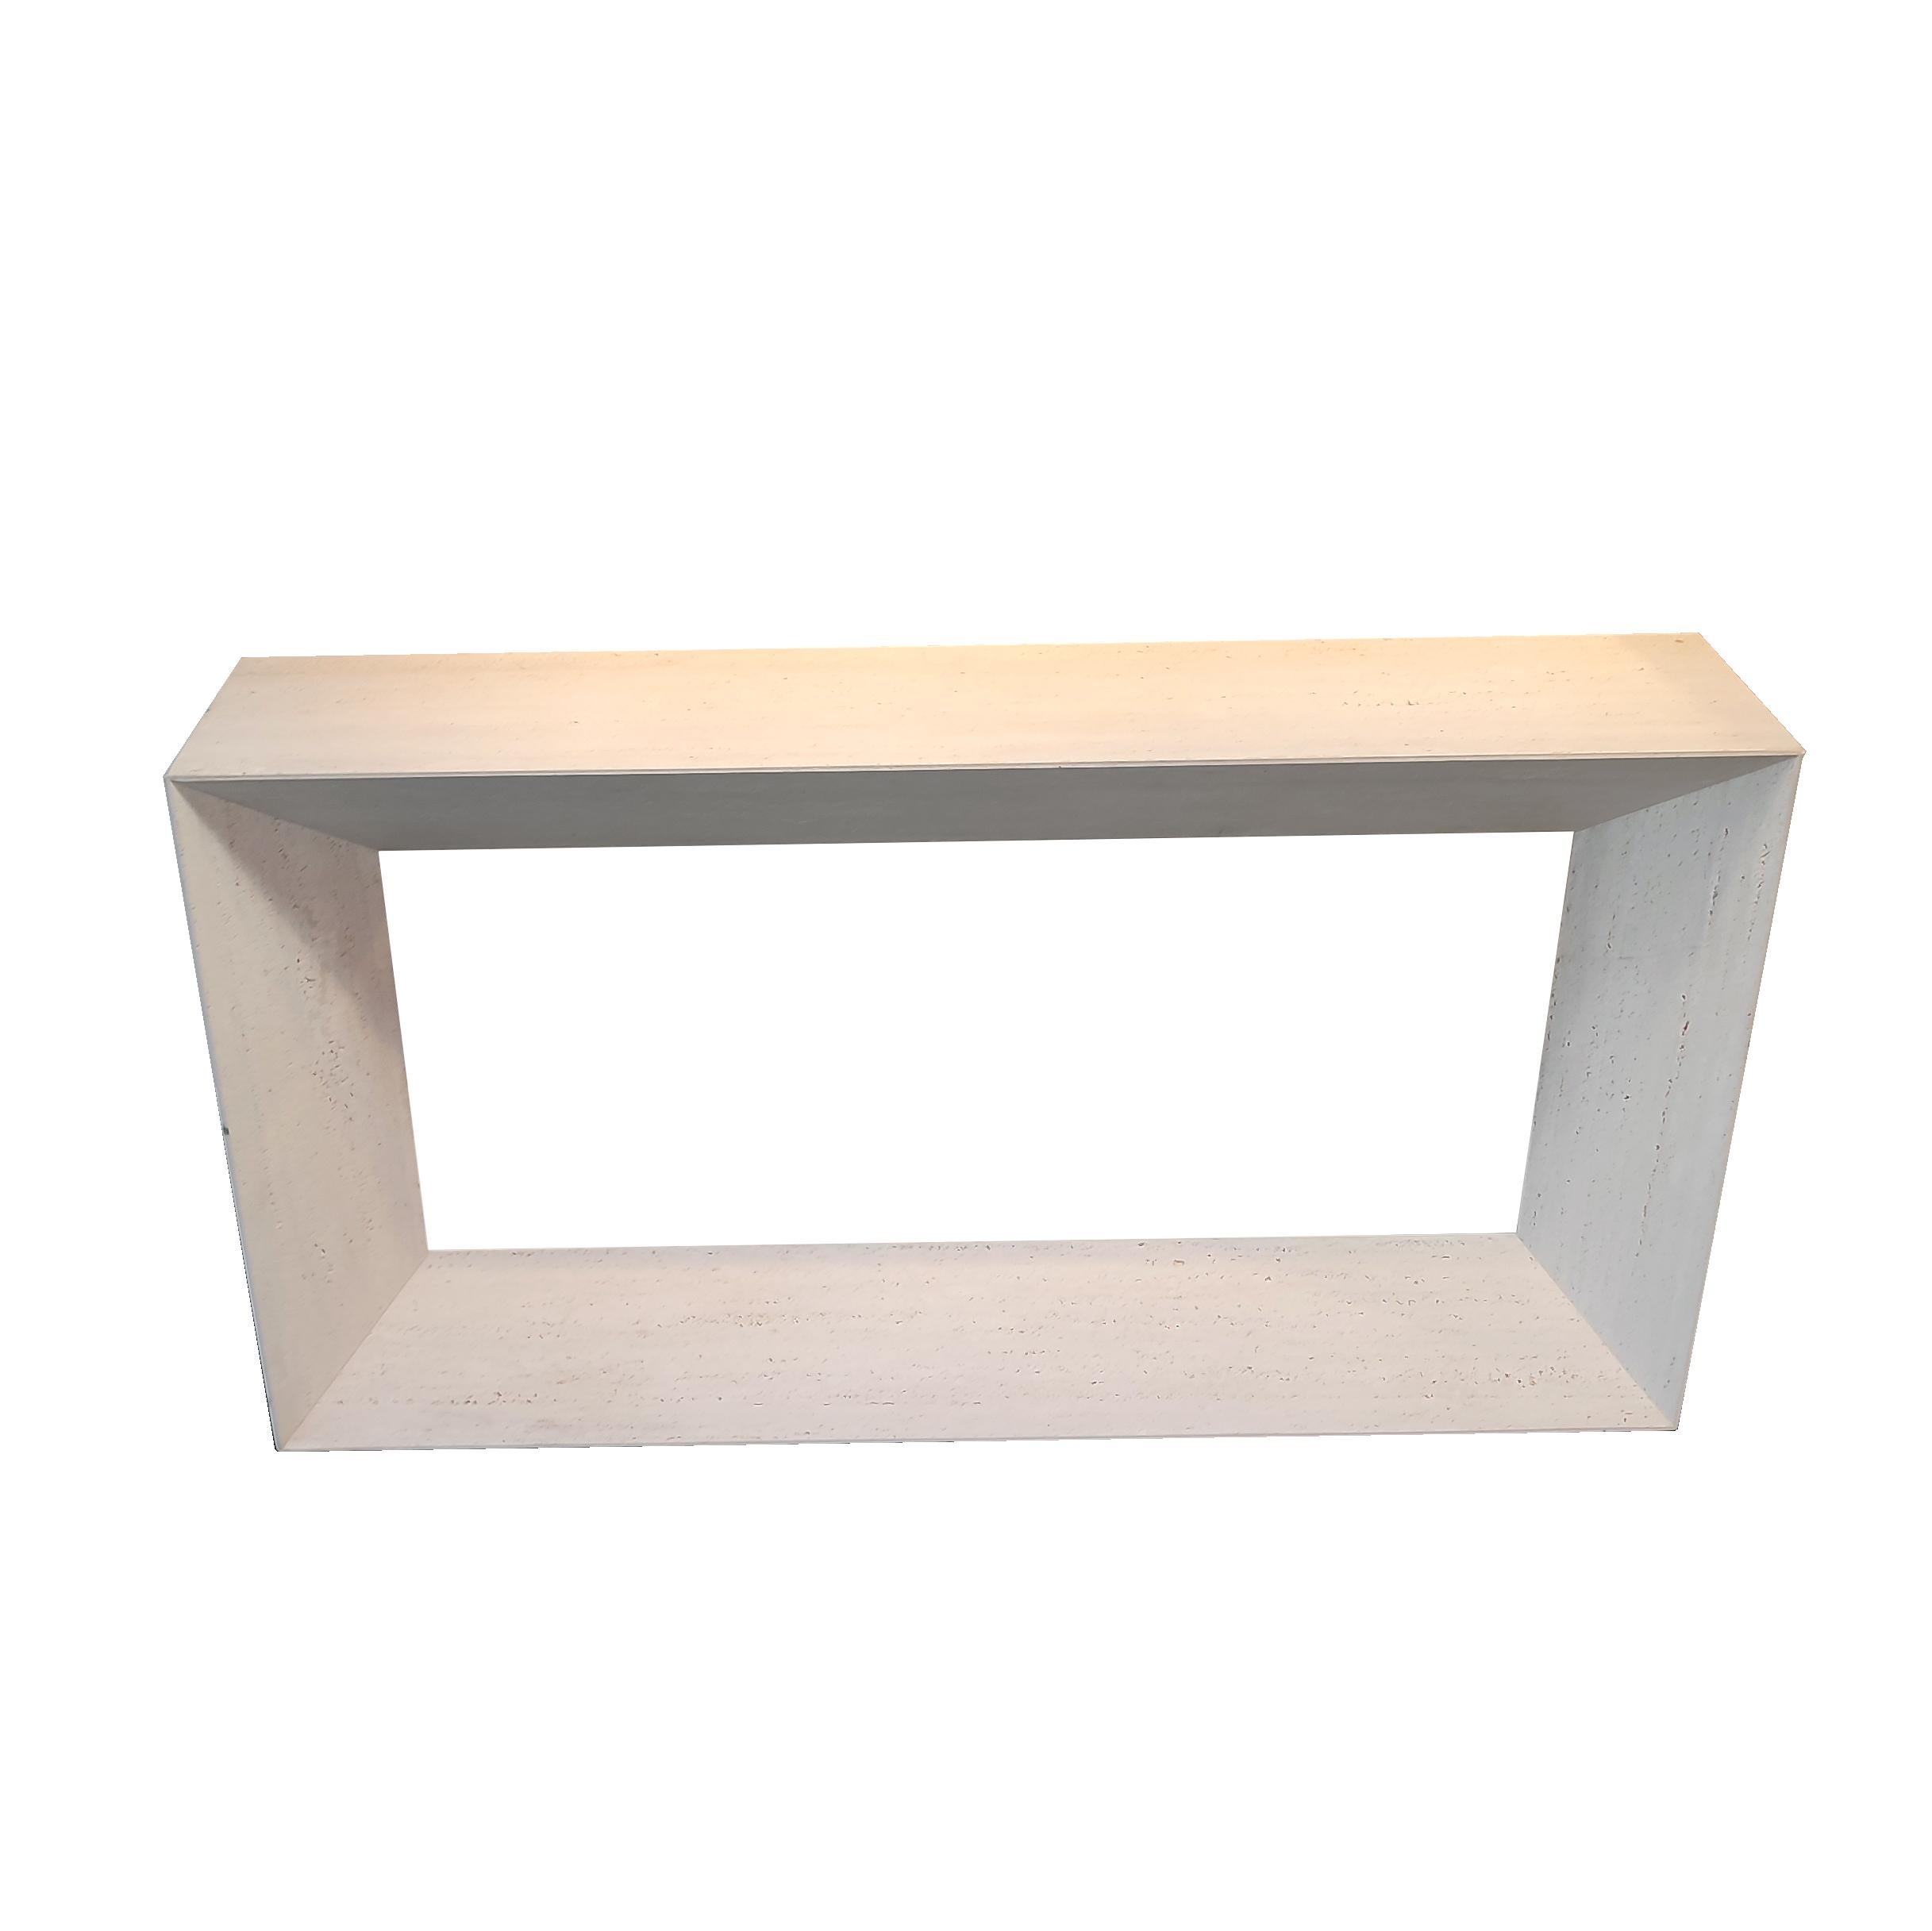 Spanish MYA Travertine Marble Console Table Spain Contemporary Design Made to Measure For Sale